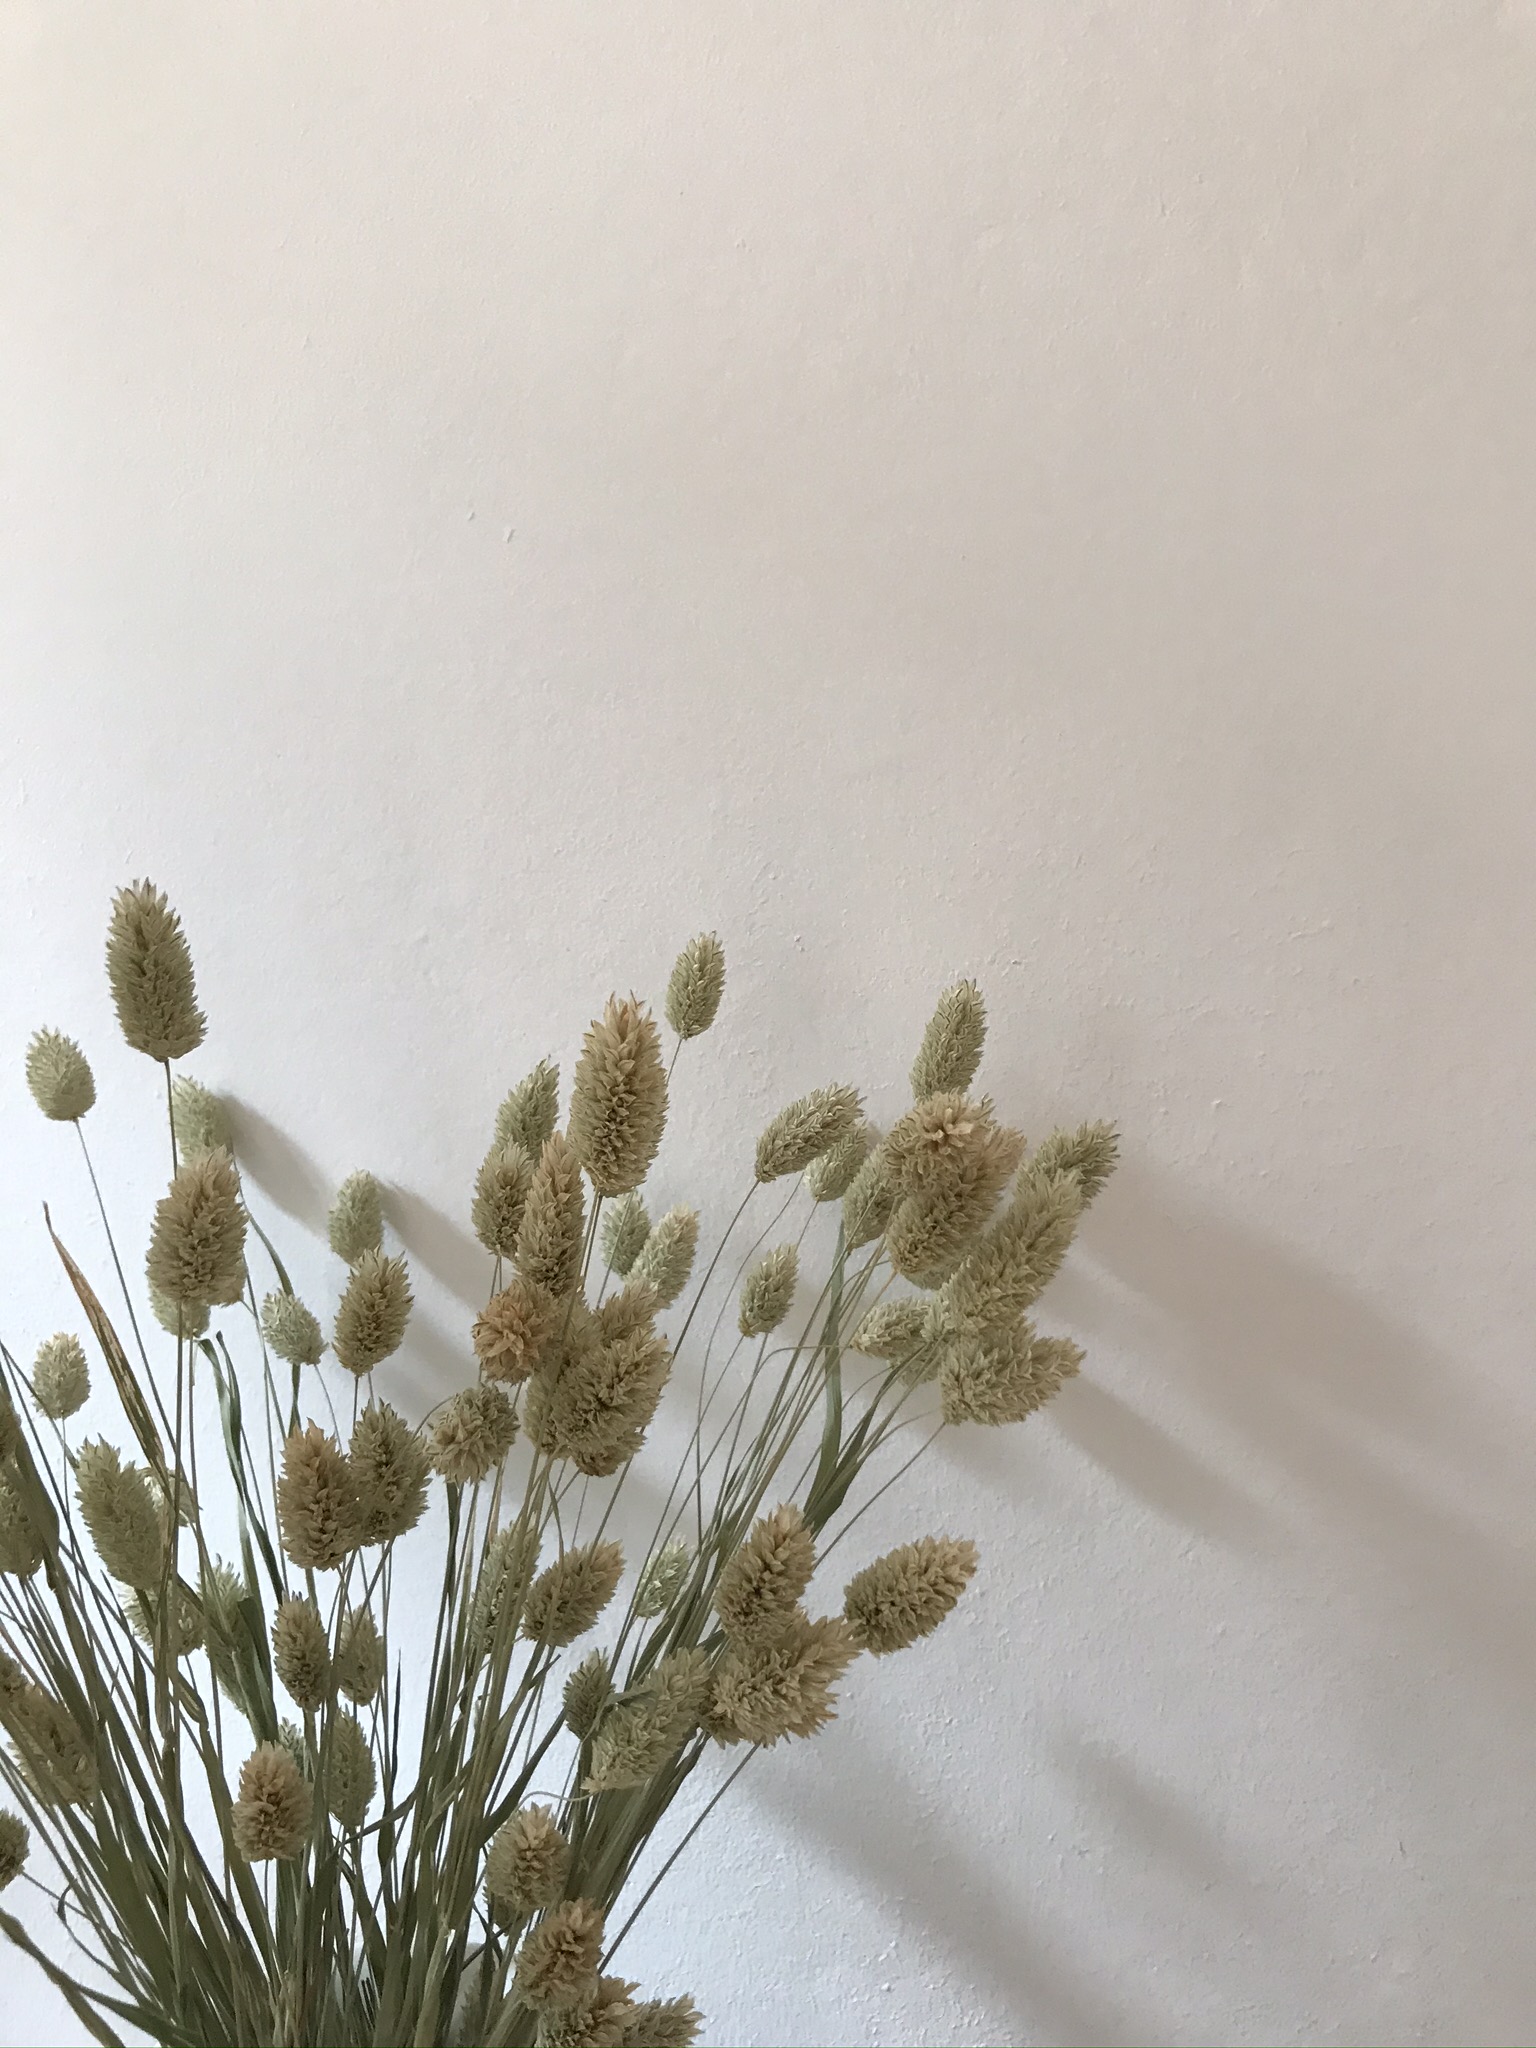 Dried Flowers, sustainable arrangement, minimal decor details, scandi home, interior design Bedroom Decor Details, Dried Flowers, beige storage, mirror, Hay Matin Lamp, minimal style neutral home, slow living | RG Daily Blog